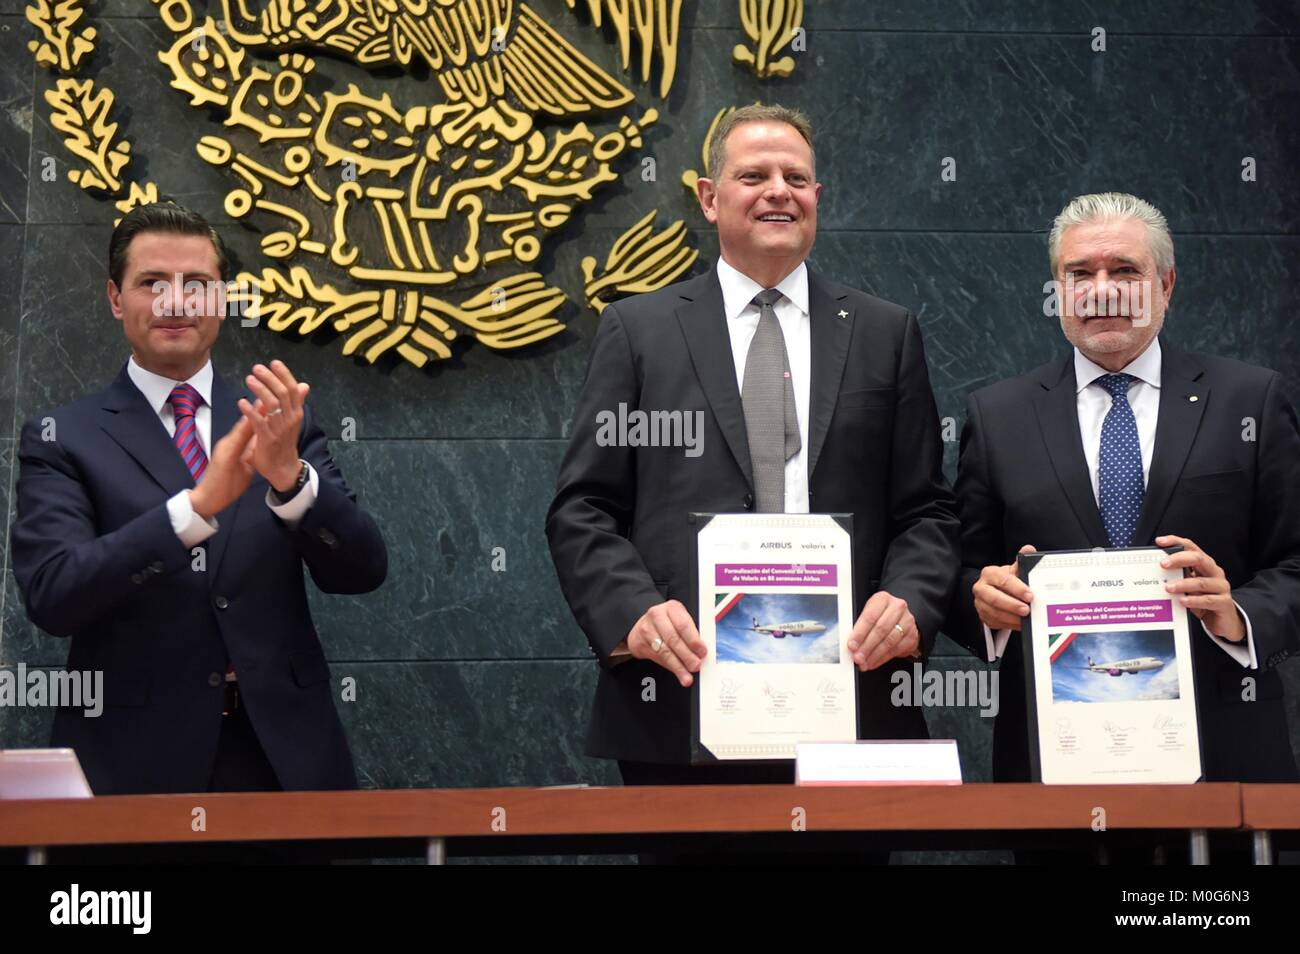 Mexican President Enrique Pena Nieto, left, applauds Volaris CEO  Enrique Beltranena, center, and Airbus President for Latin America Rafael Alonso during an announcement at the National Palace January 17, 2018 in Mexico City, Mexico. The Mexican discount carrier Volaris announced the purchase of 80 Airbus aircraft worth $9.3 billion dollars. Stock Photo